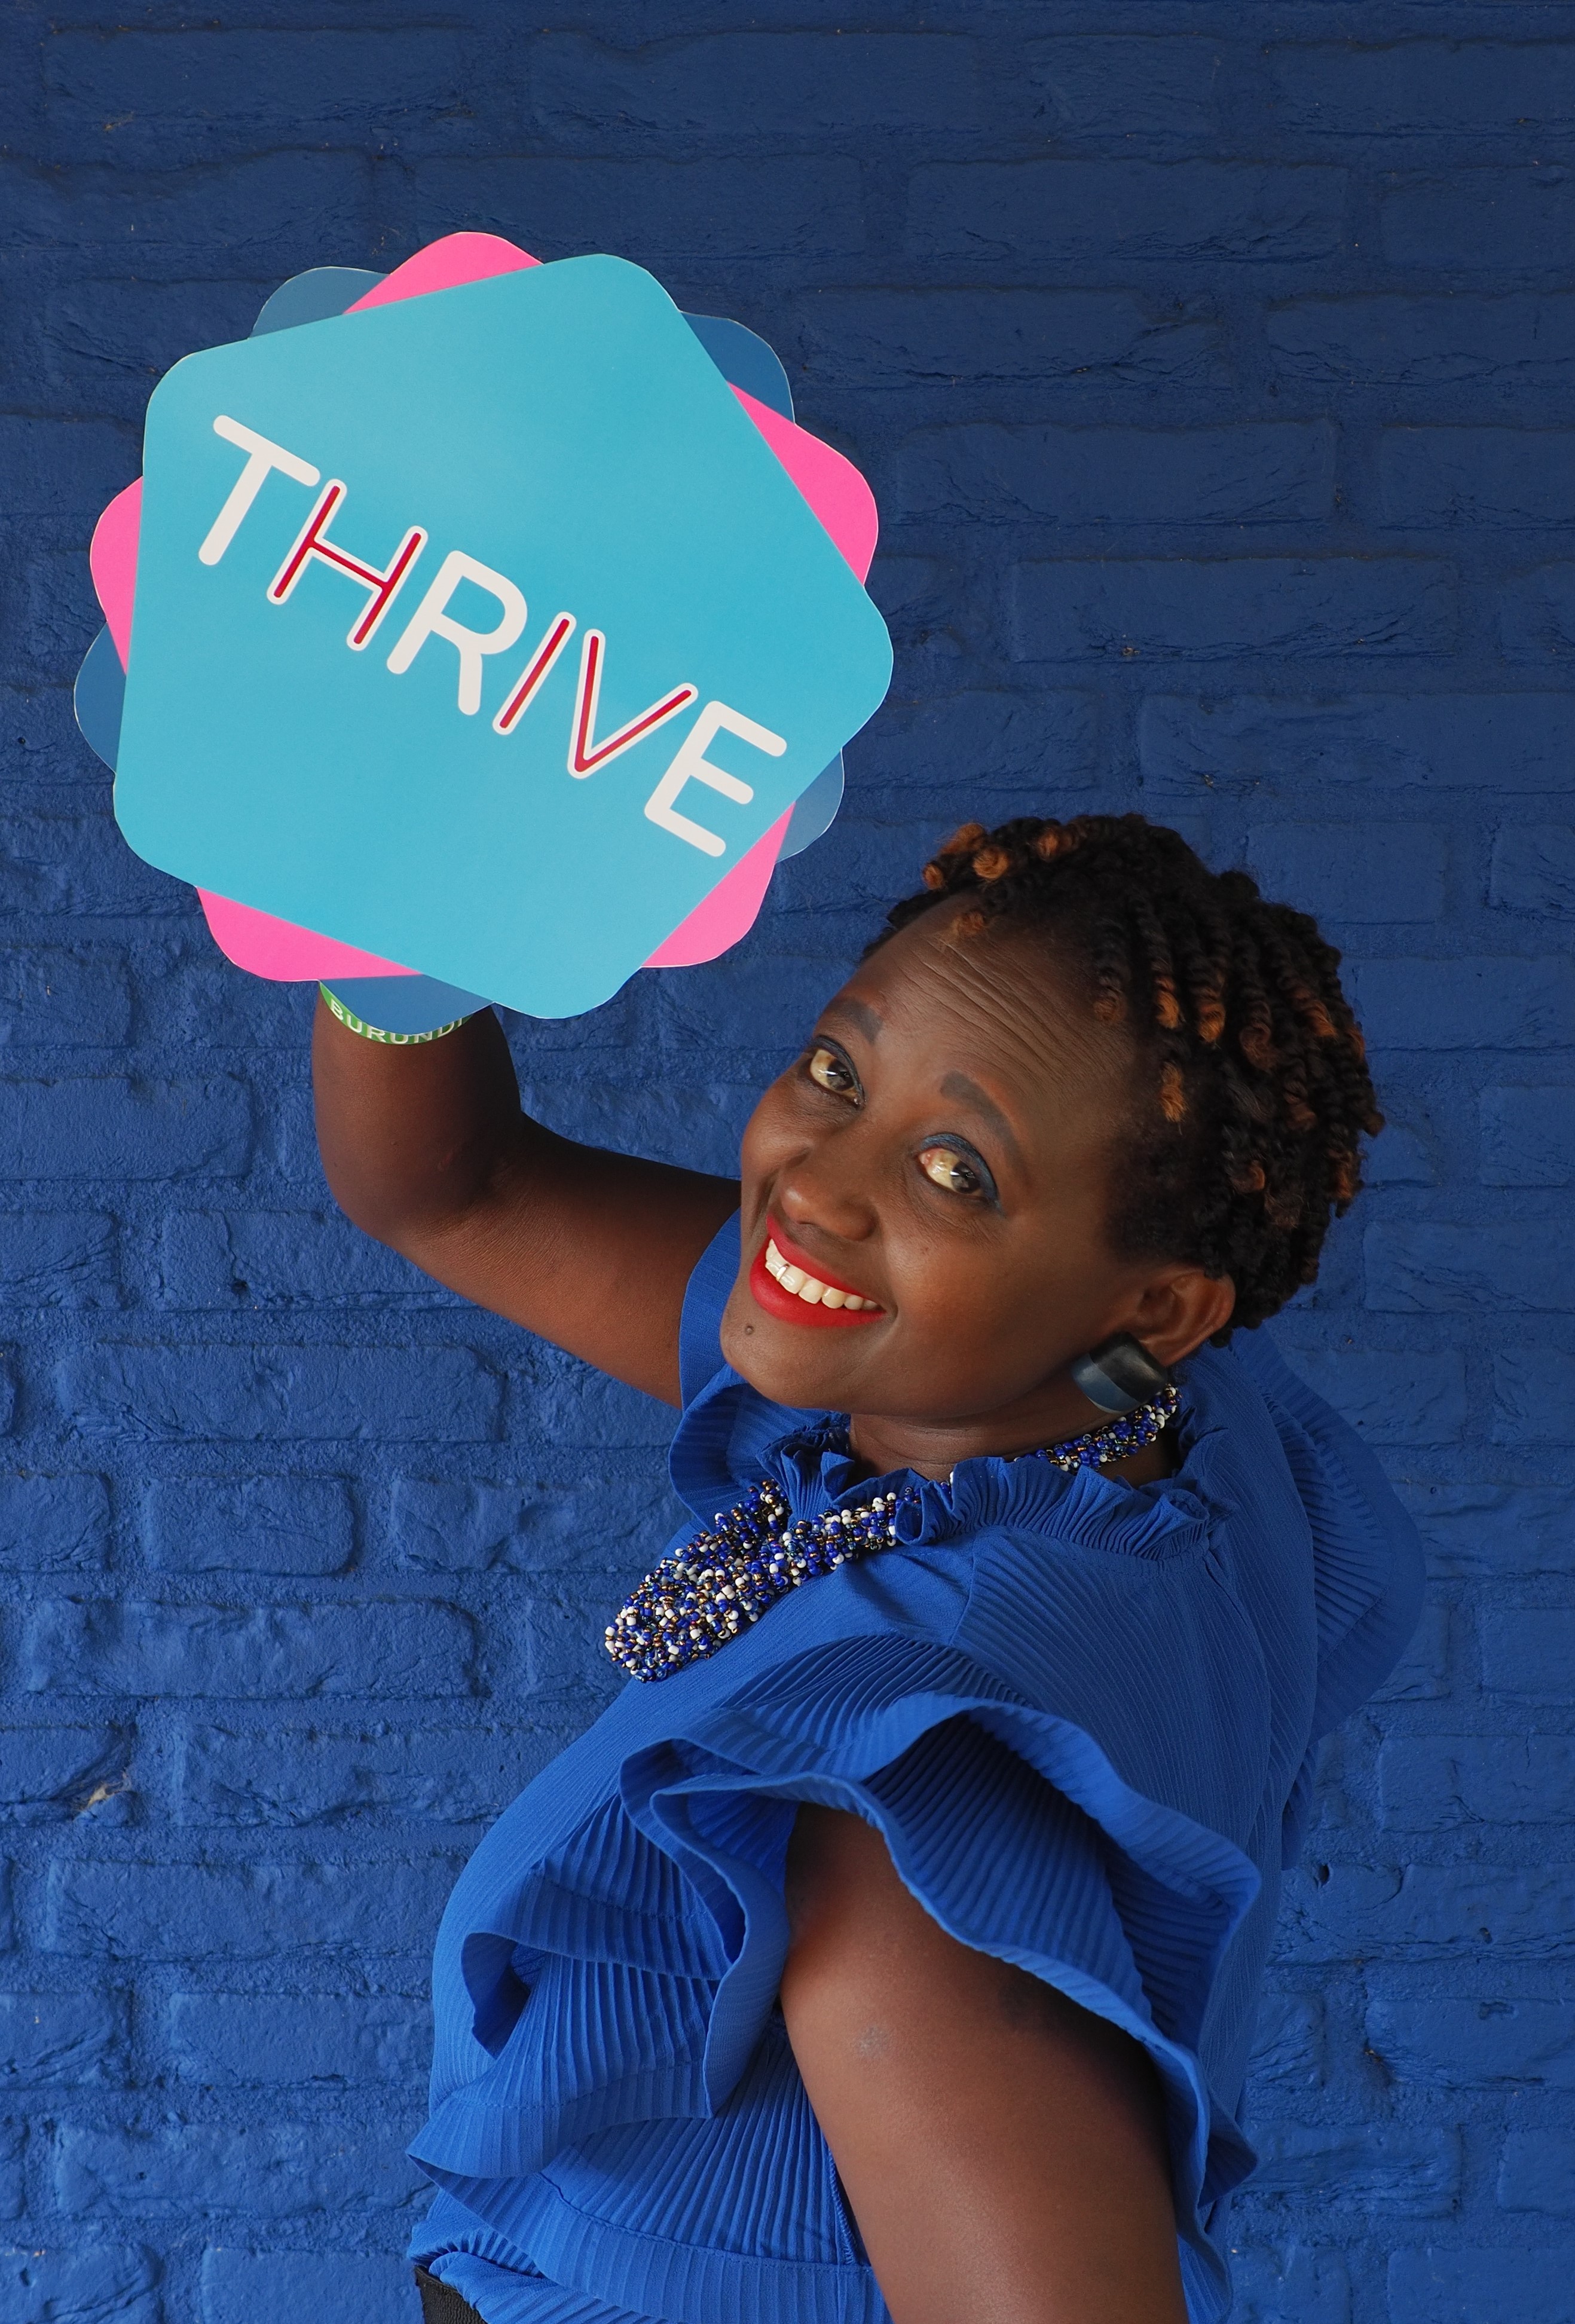 Eliane (HIVstigmafighter) holding a sign that reads "THRIVE".